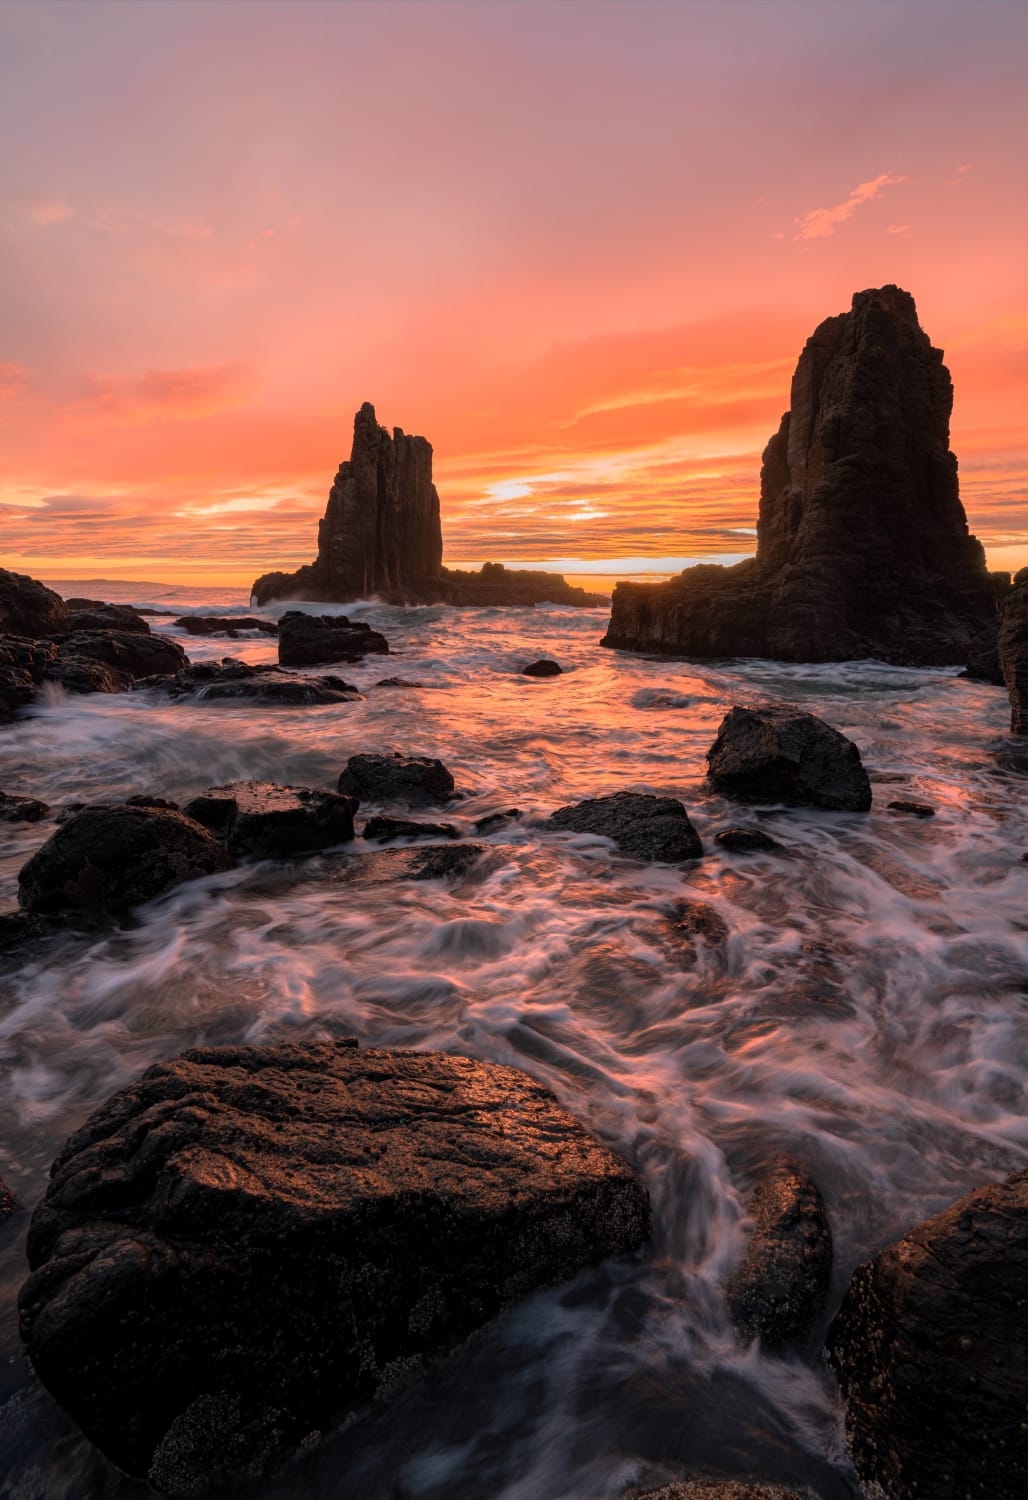 "Recovery" 2022. Kiama, NSW, Australia. First shoot in many months, very nice to dust the cobwebs off in this light. [OG]